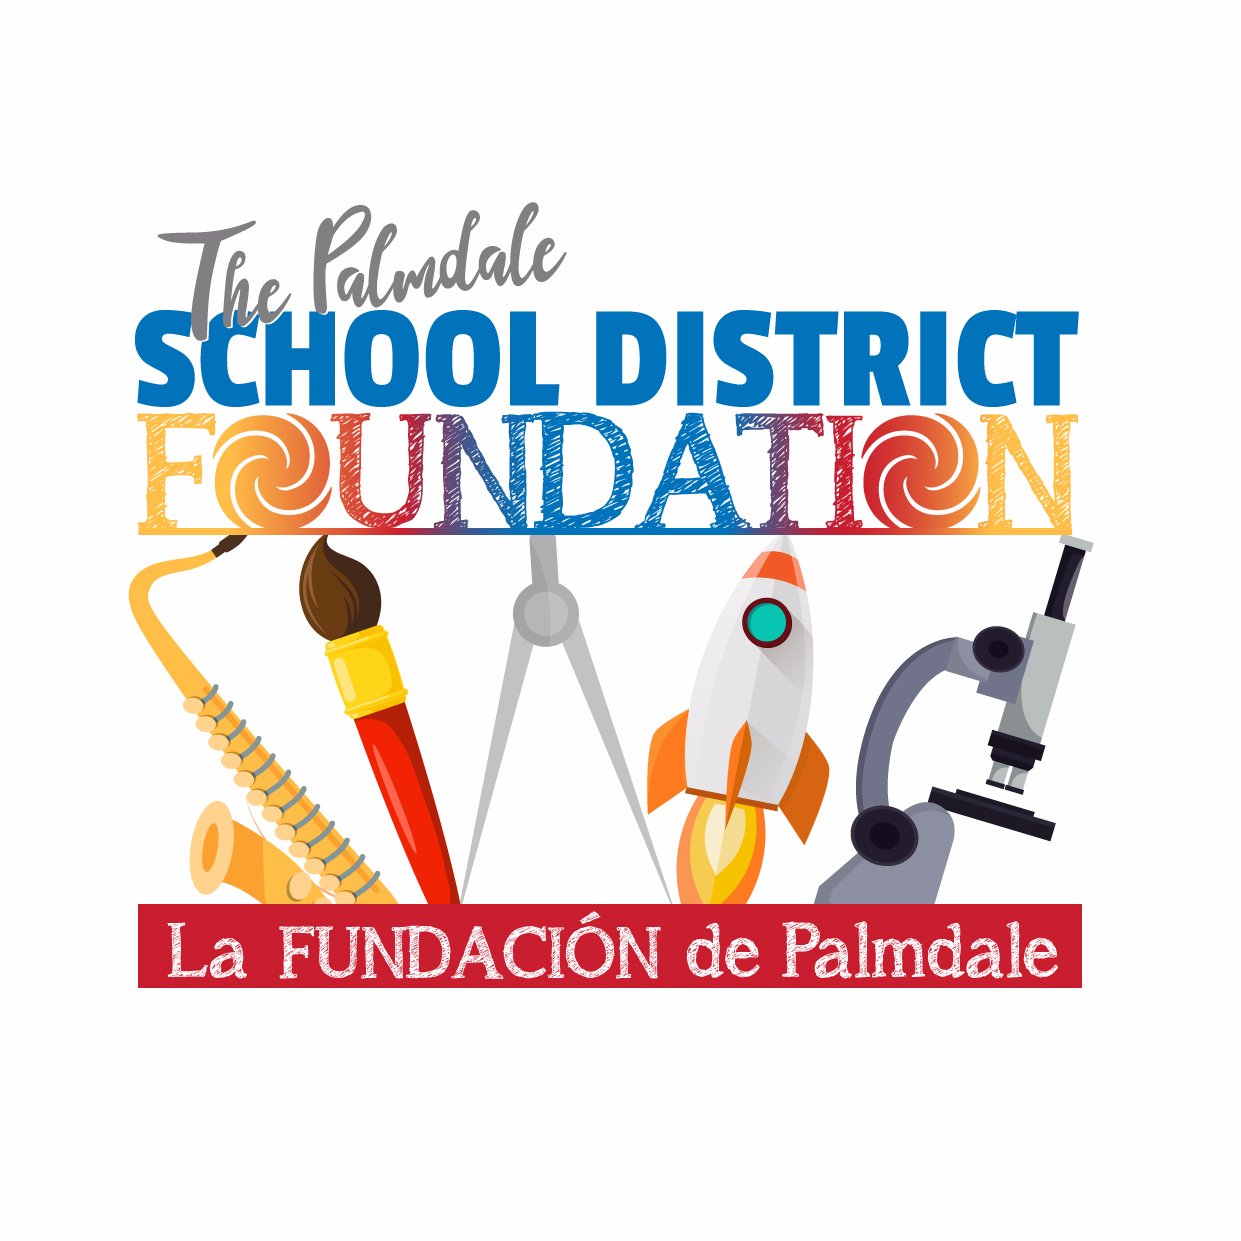 The Palmdale School District Foundation